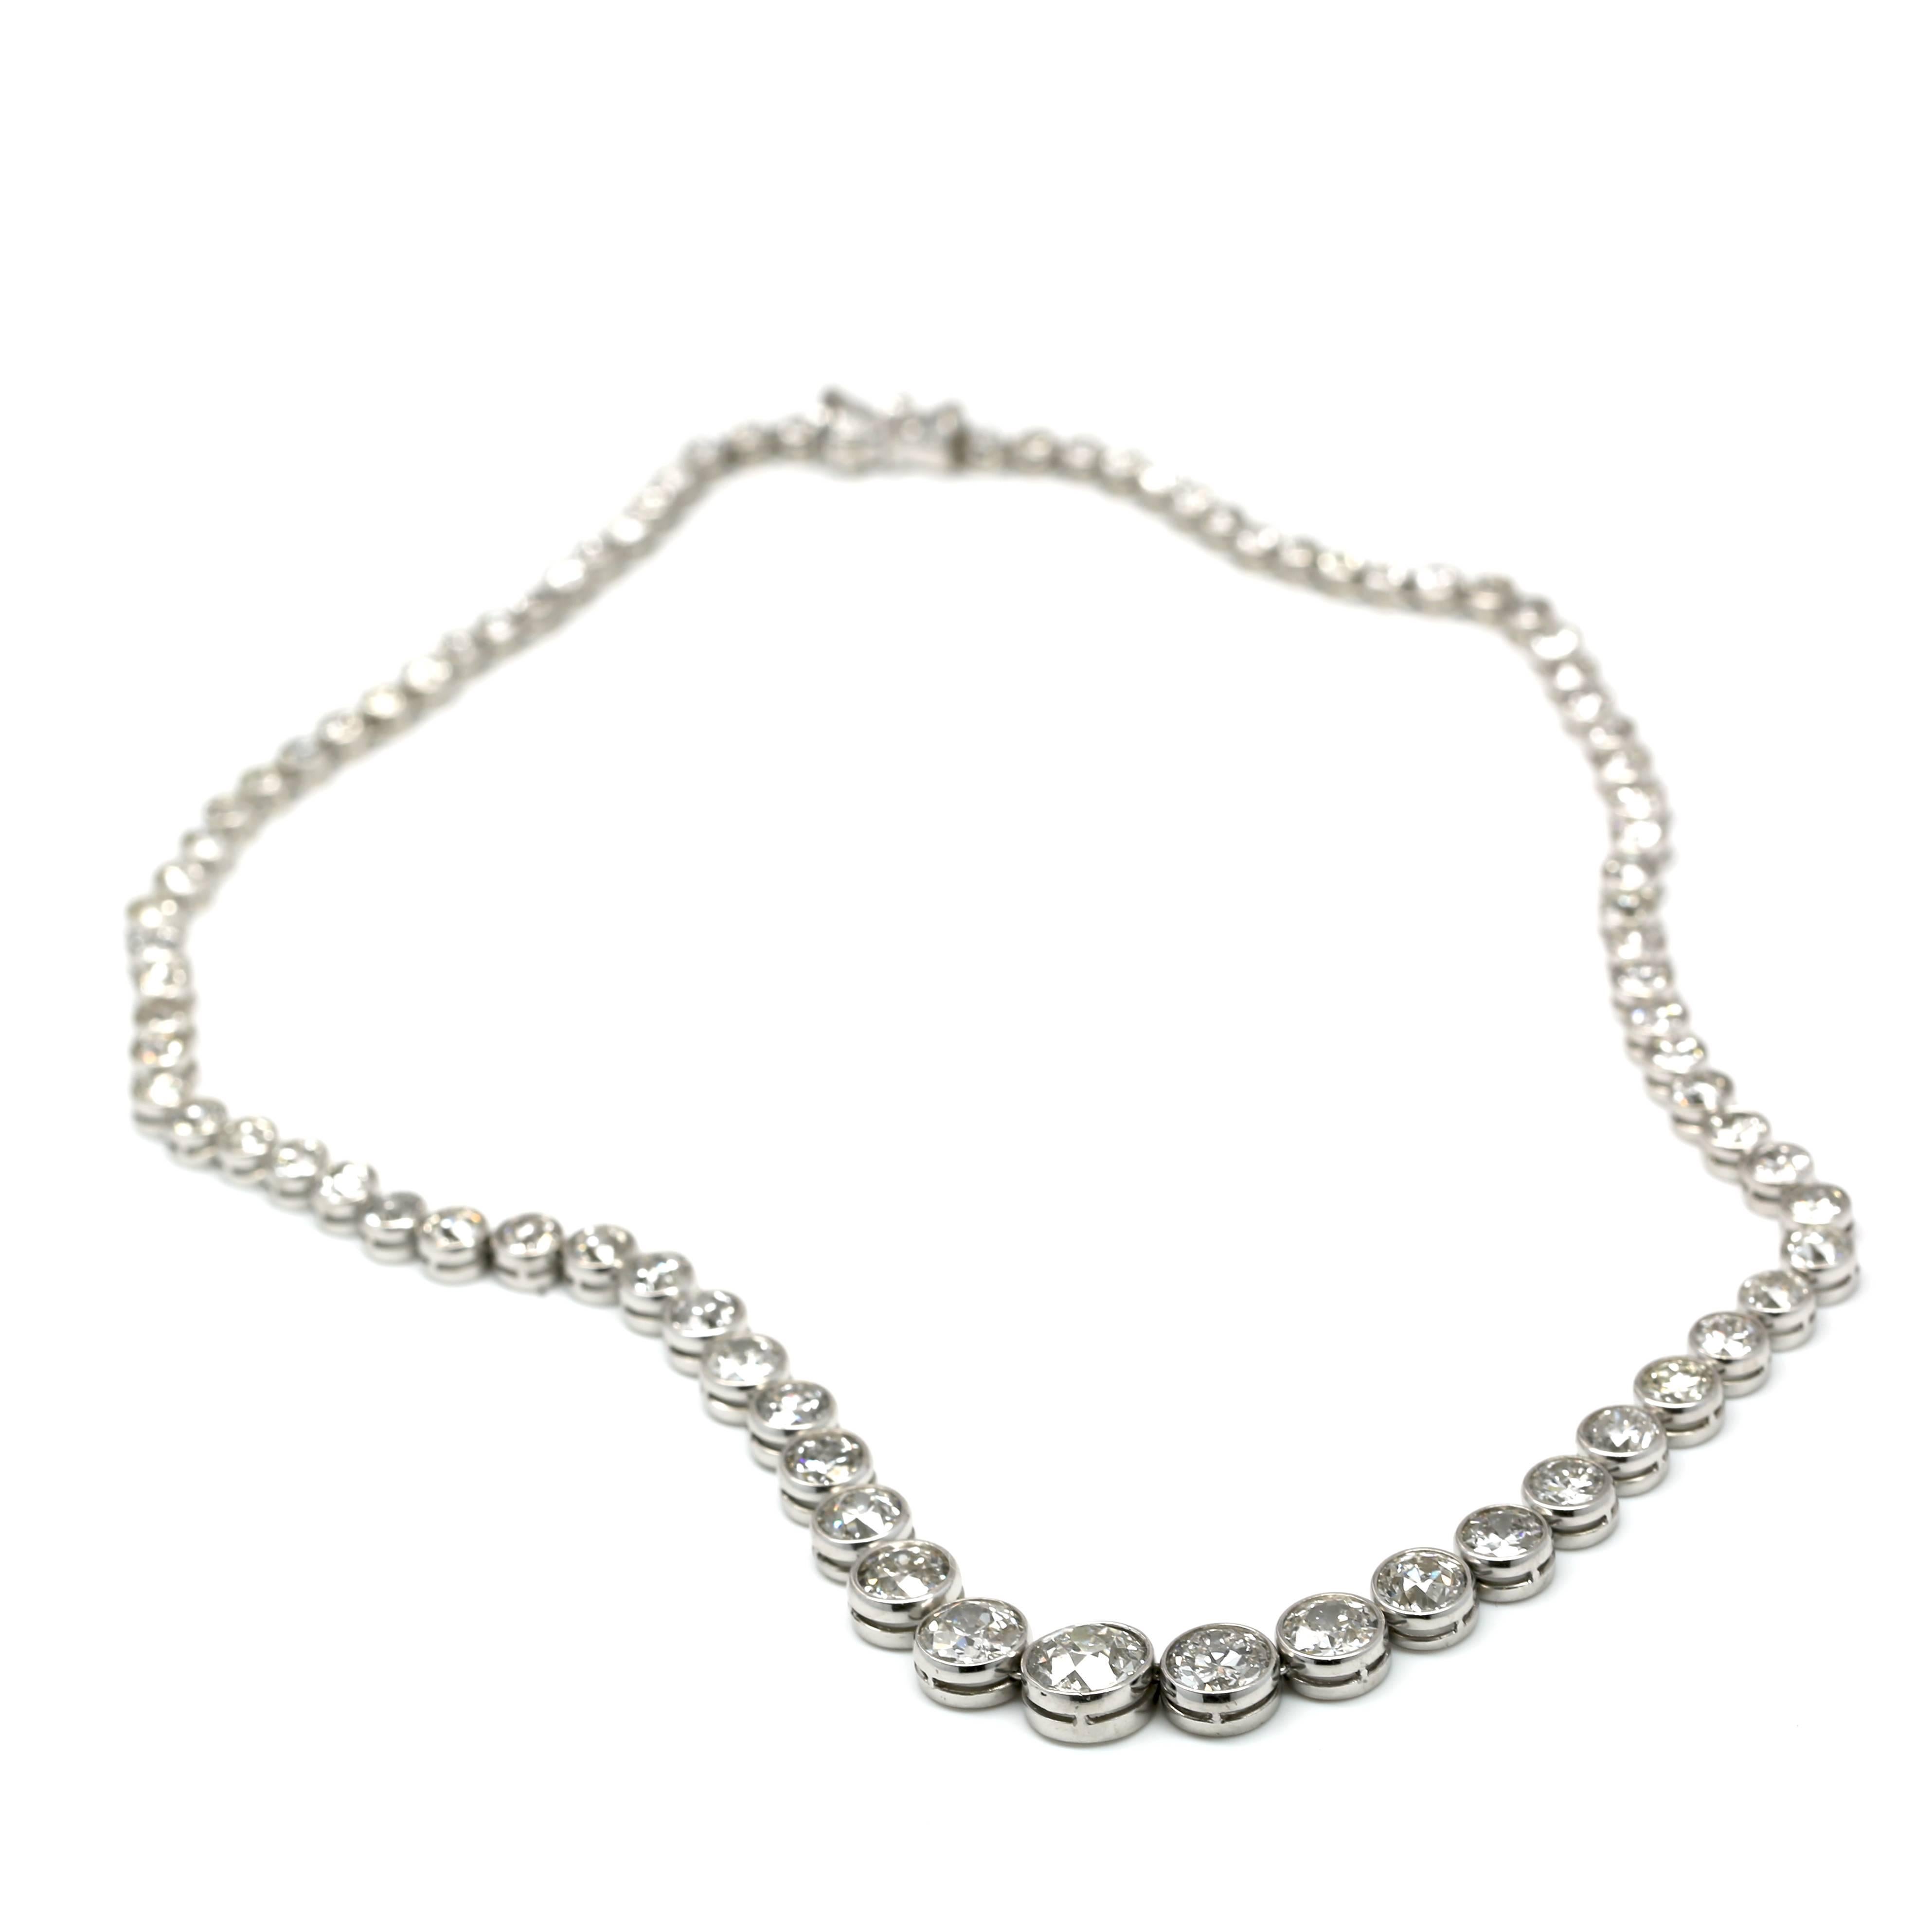 Platinum Riviera Necklace set with 90 European Cut Diamonds equaling Approx. 41.00 Carats F-H Color VS1-SI1 Clarity.